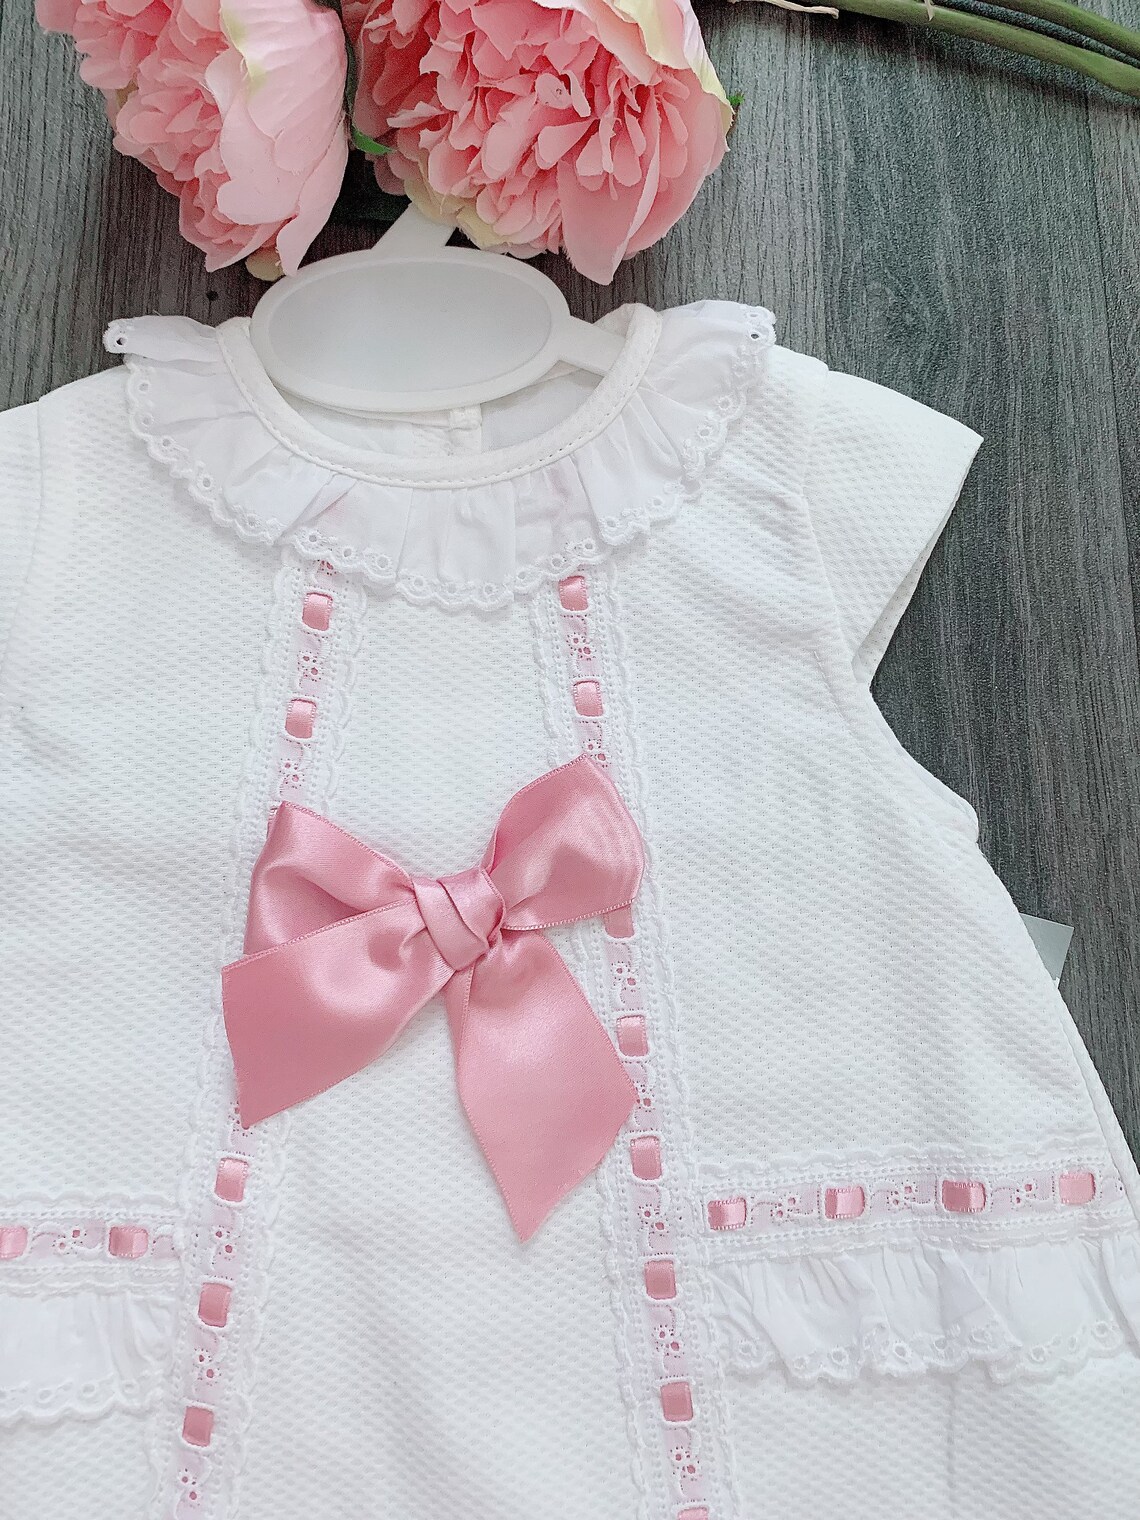 Baby Girl Spanish Style Summer 2pc Outfit Dress and Hat | Etsy